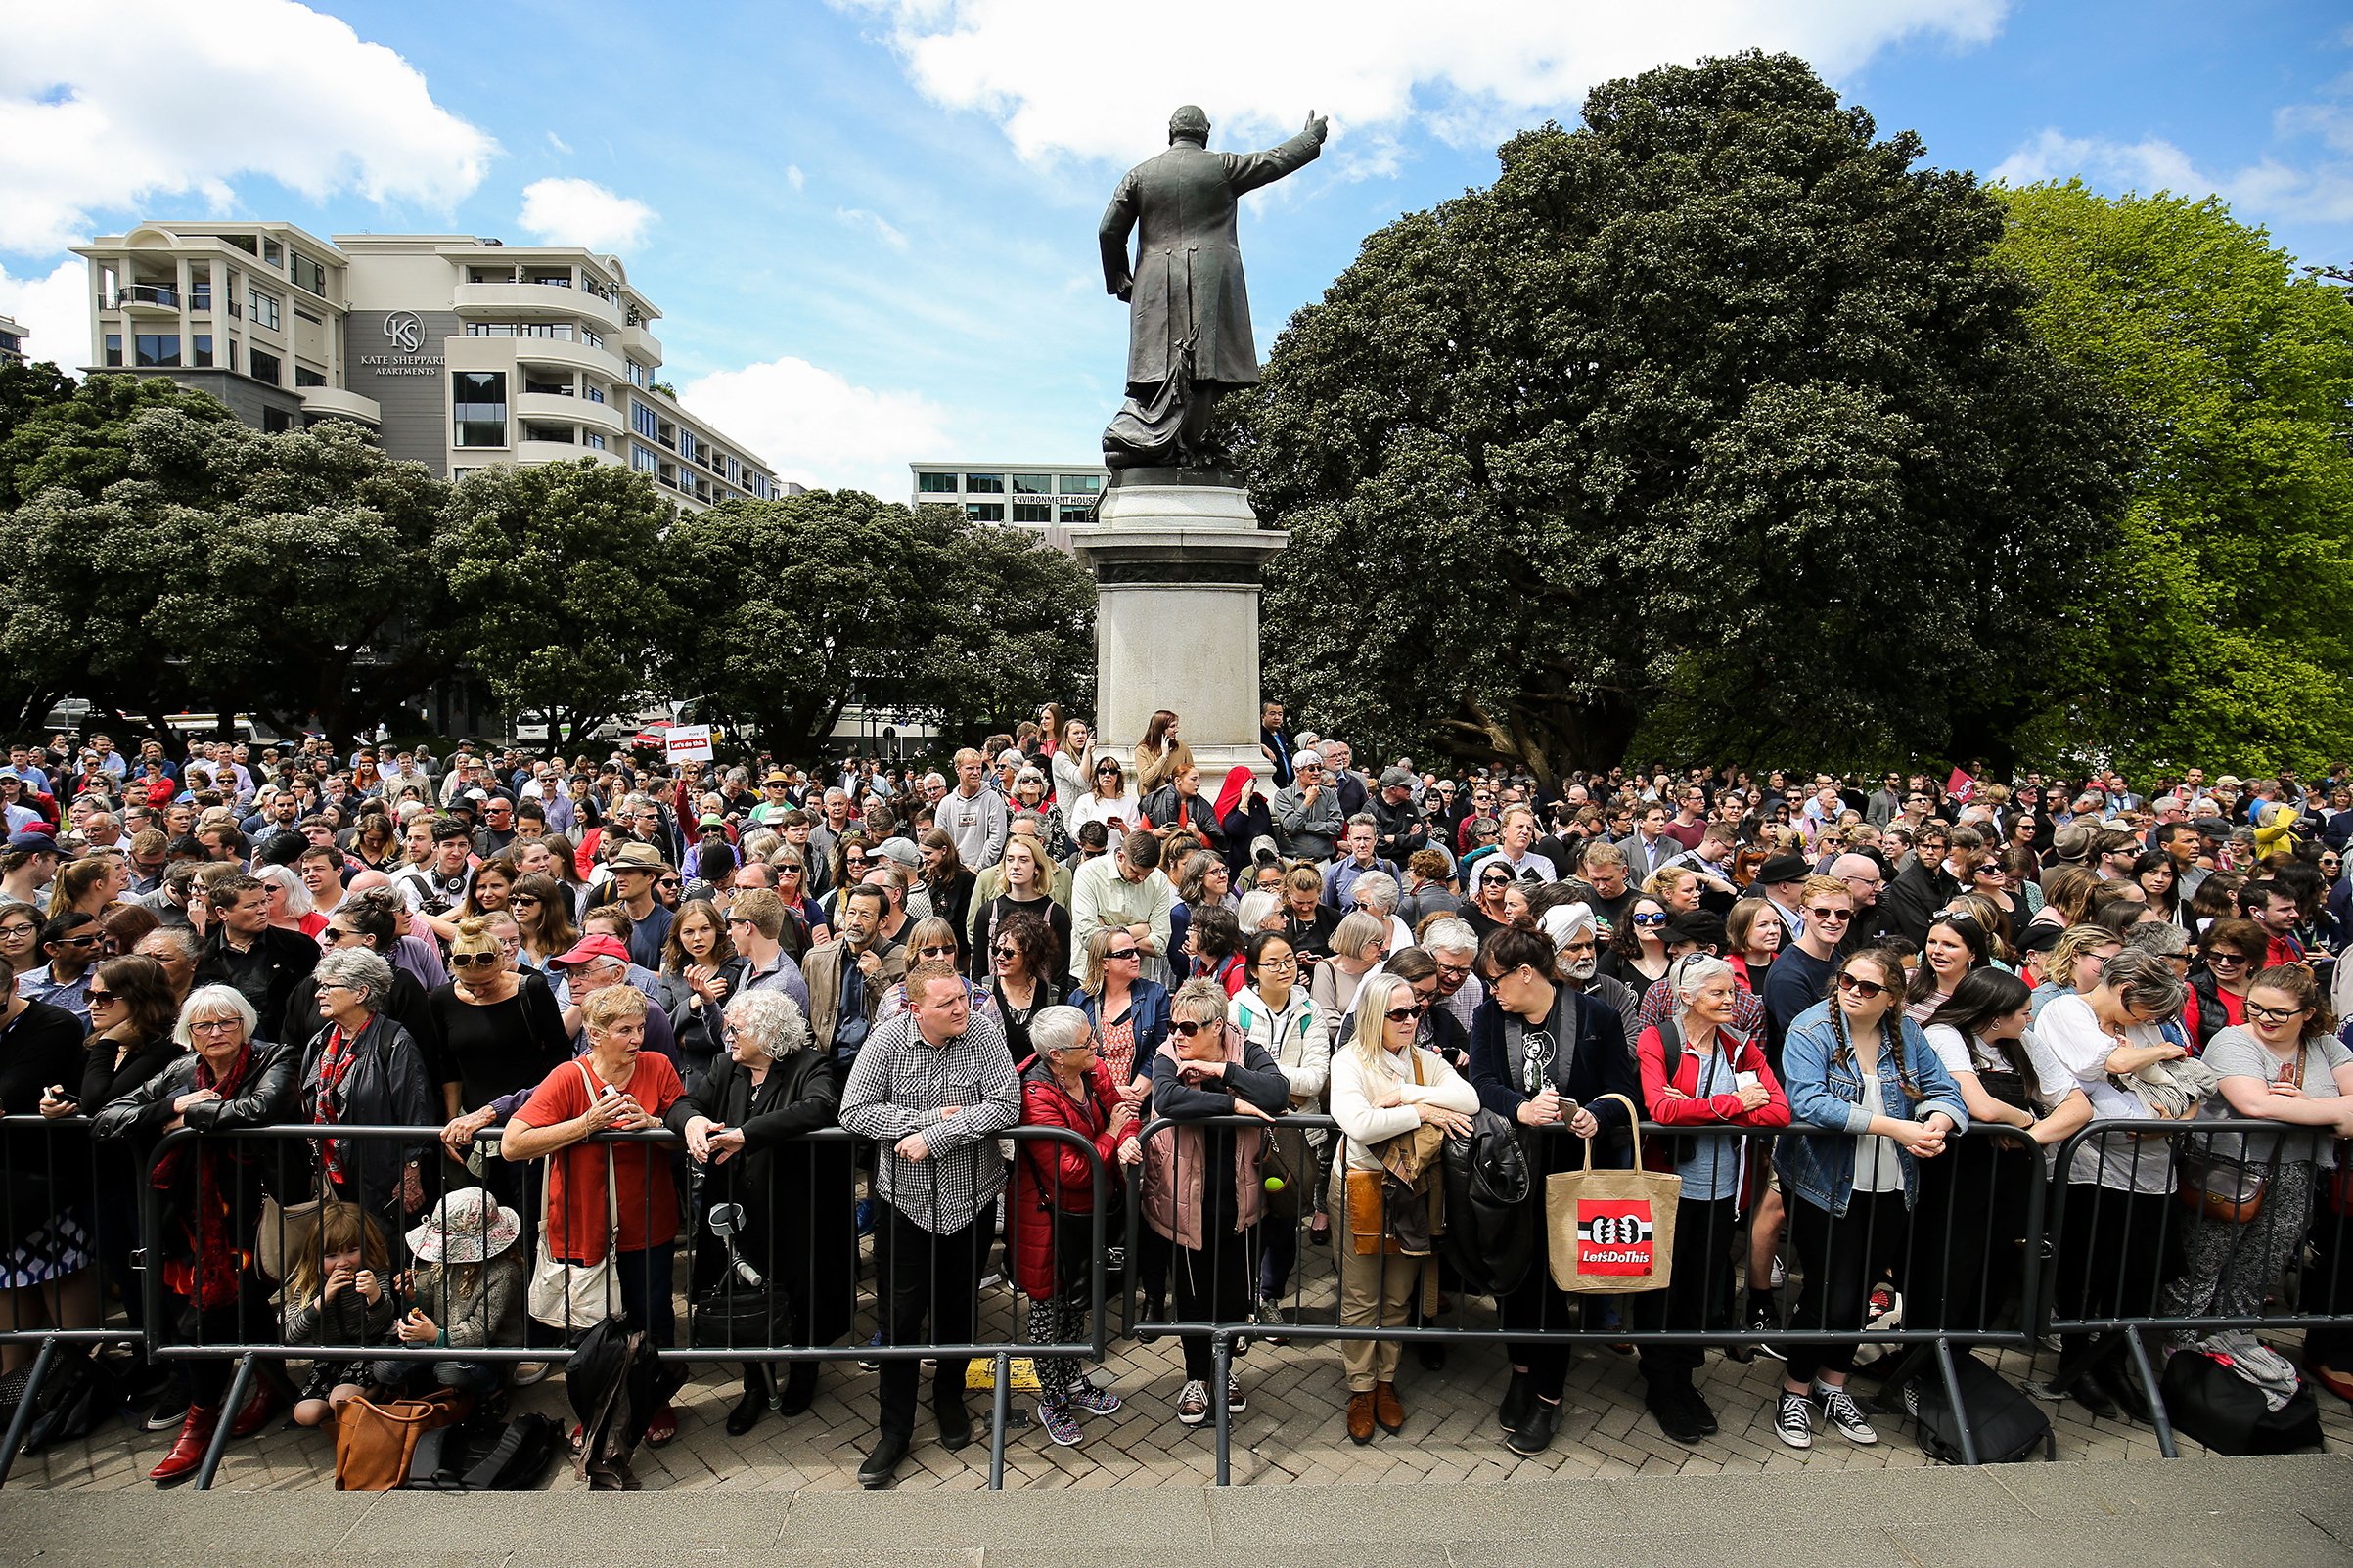 A crowd awaits the arrival of Prime Minister Jacinda Ardern at Parliament House in Wellington on Oct. 26, 2017. (Hagen Hopkins—Getty Images)